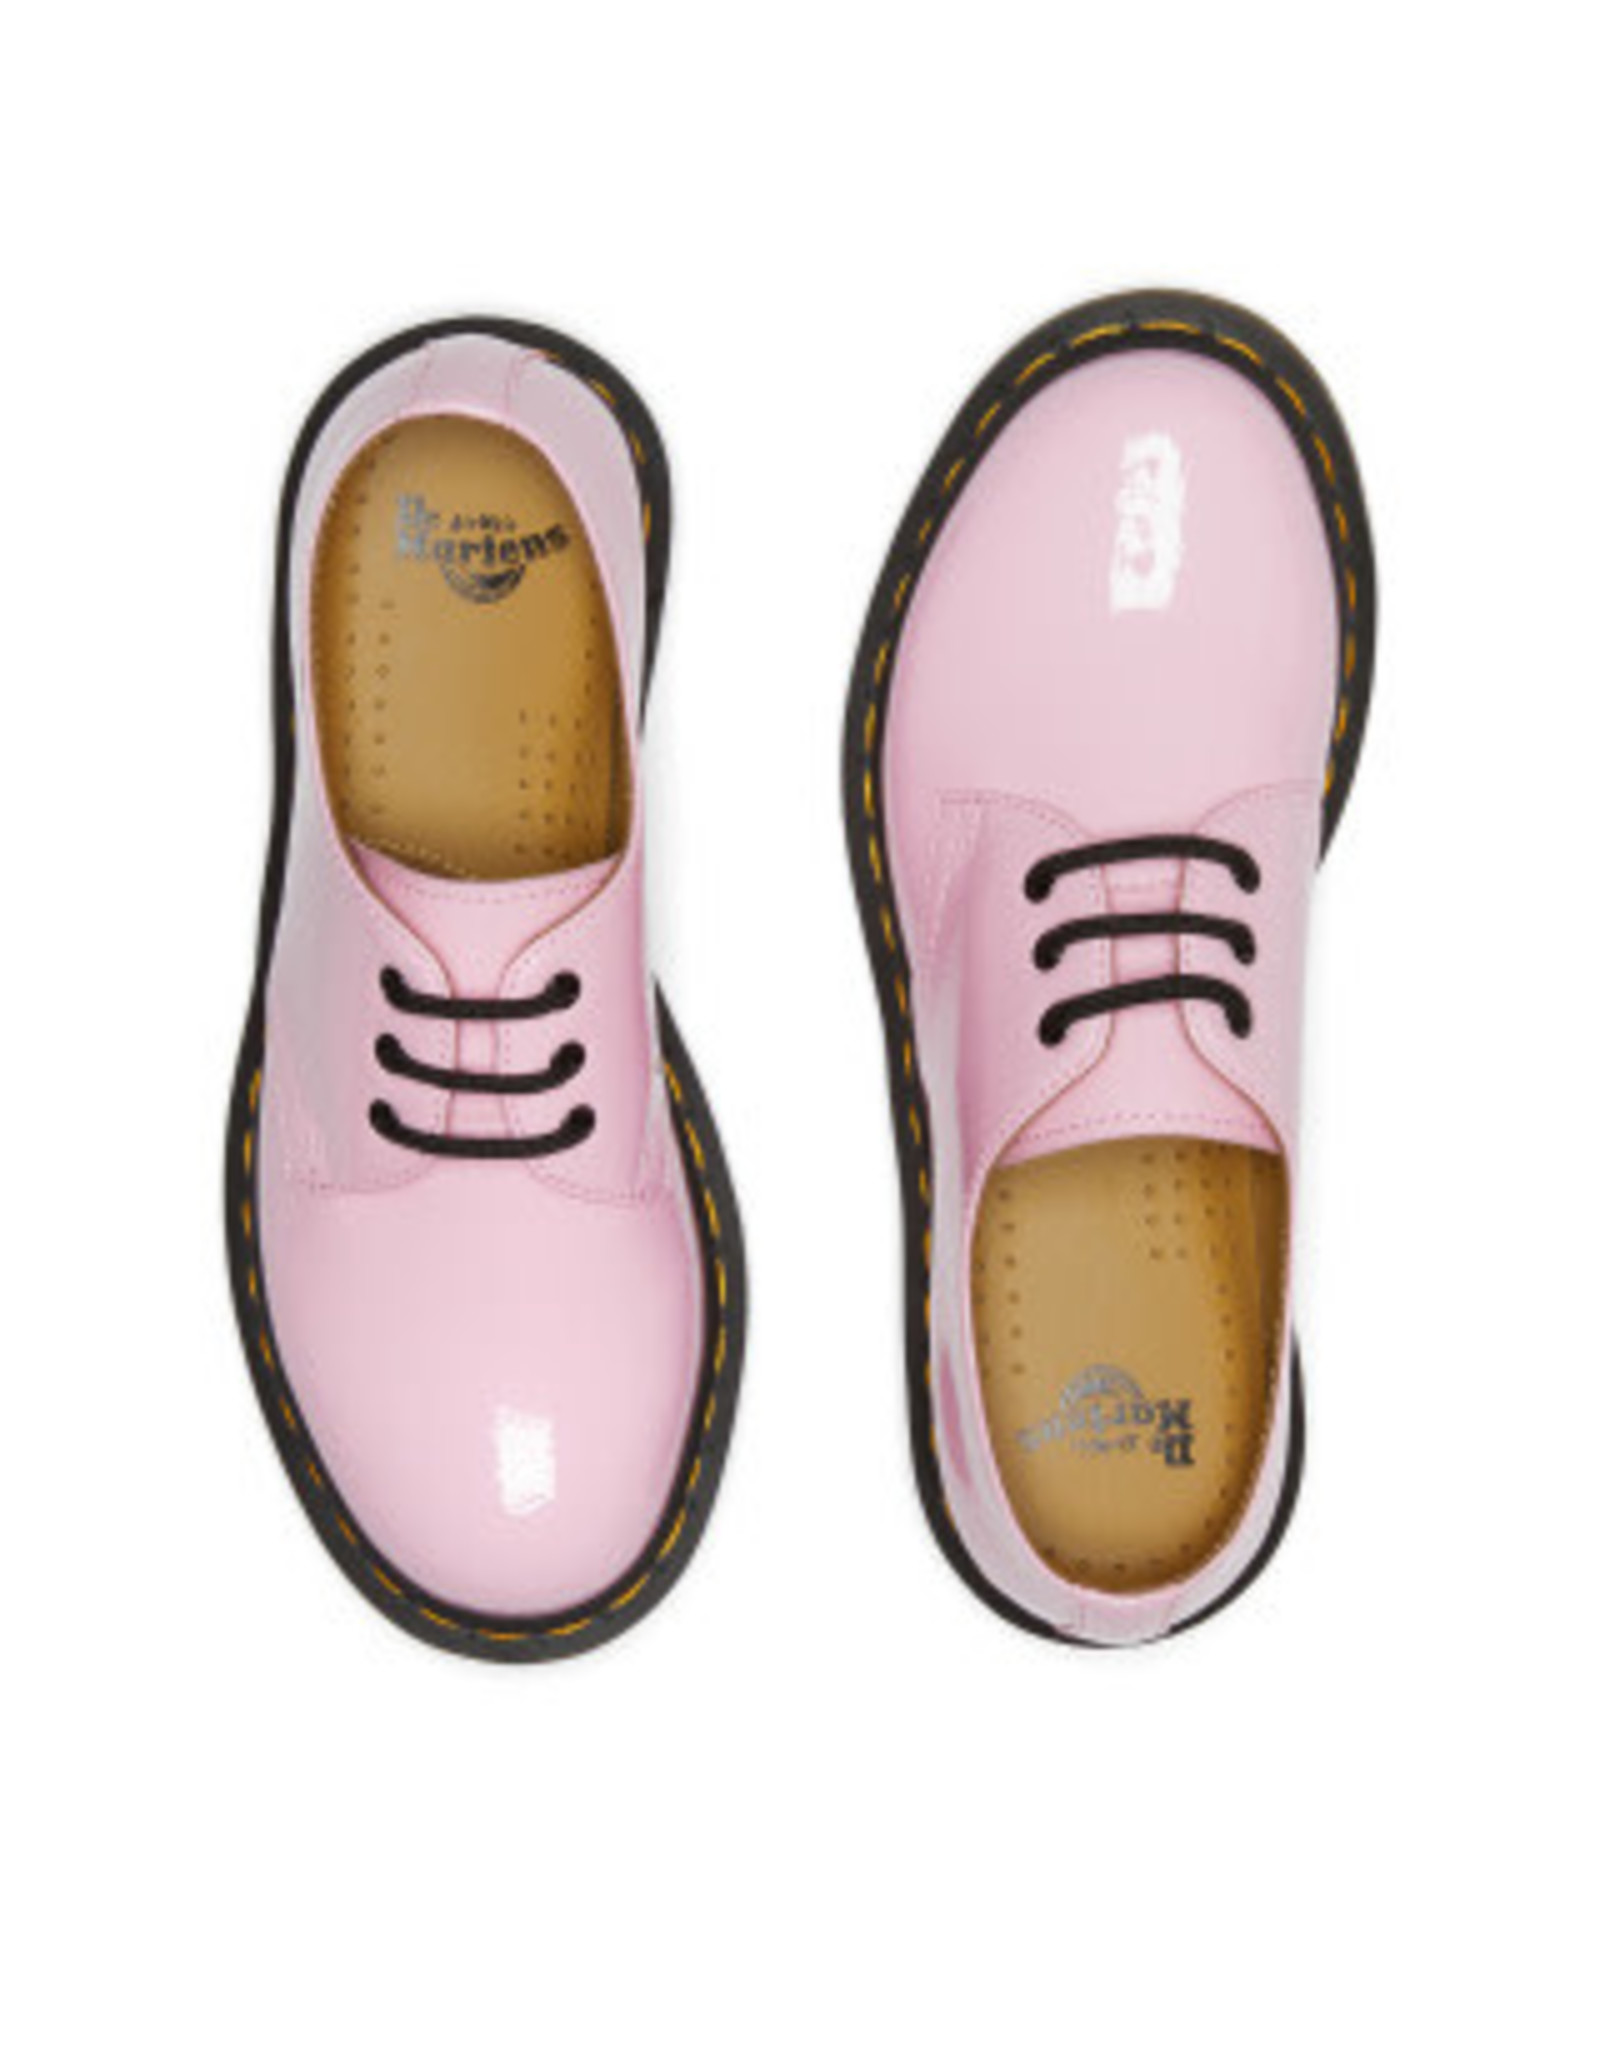 DR. MARTENS 1461 W PALE PINK PATENT LAMPER 301PPP-R26422322